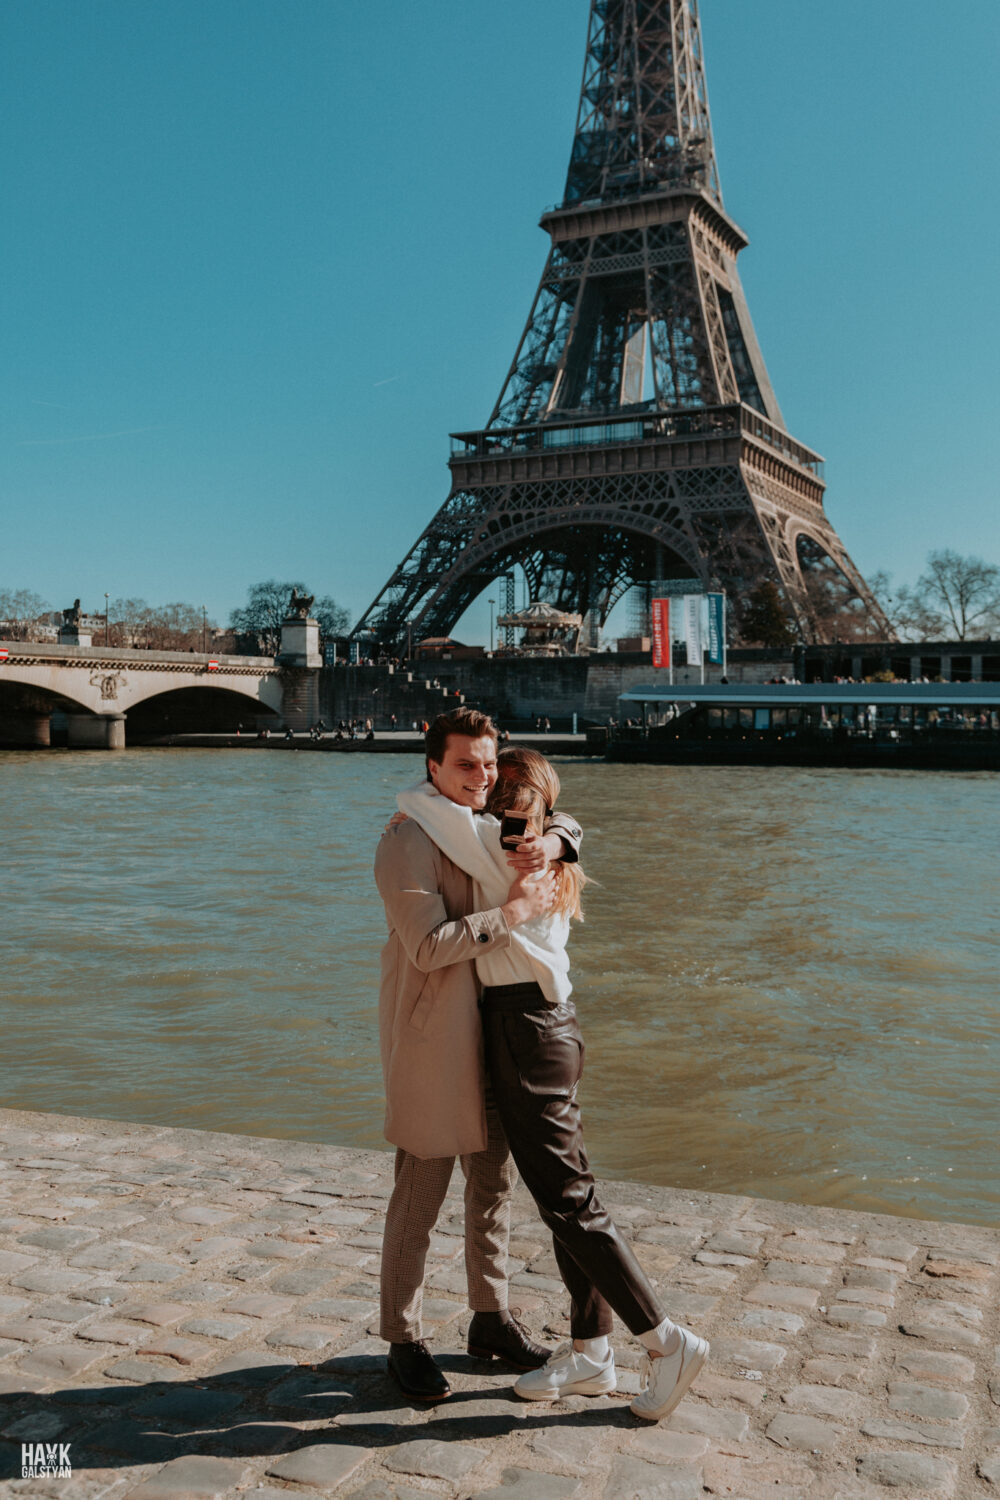 A Couples Photoshoot at the Eiffel Tower - Artsiom & Marthe